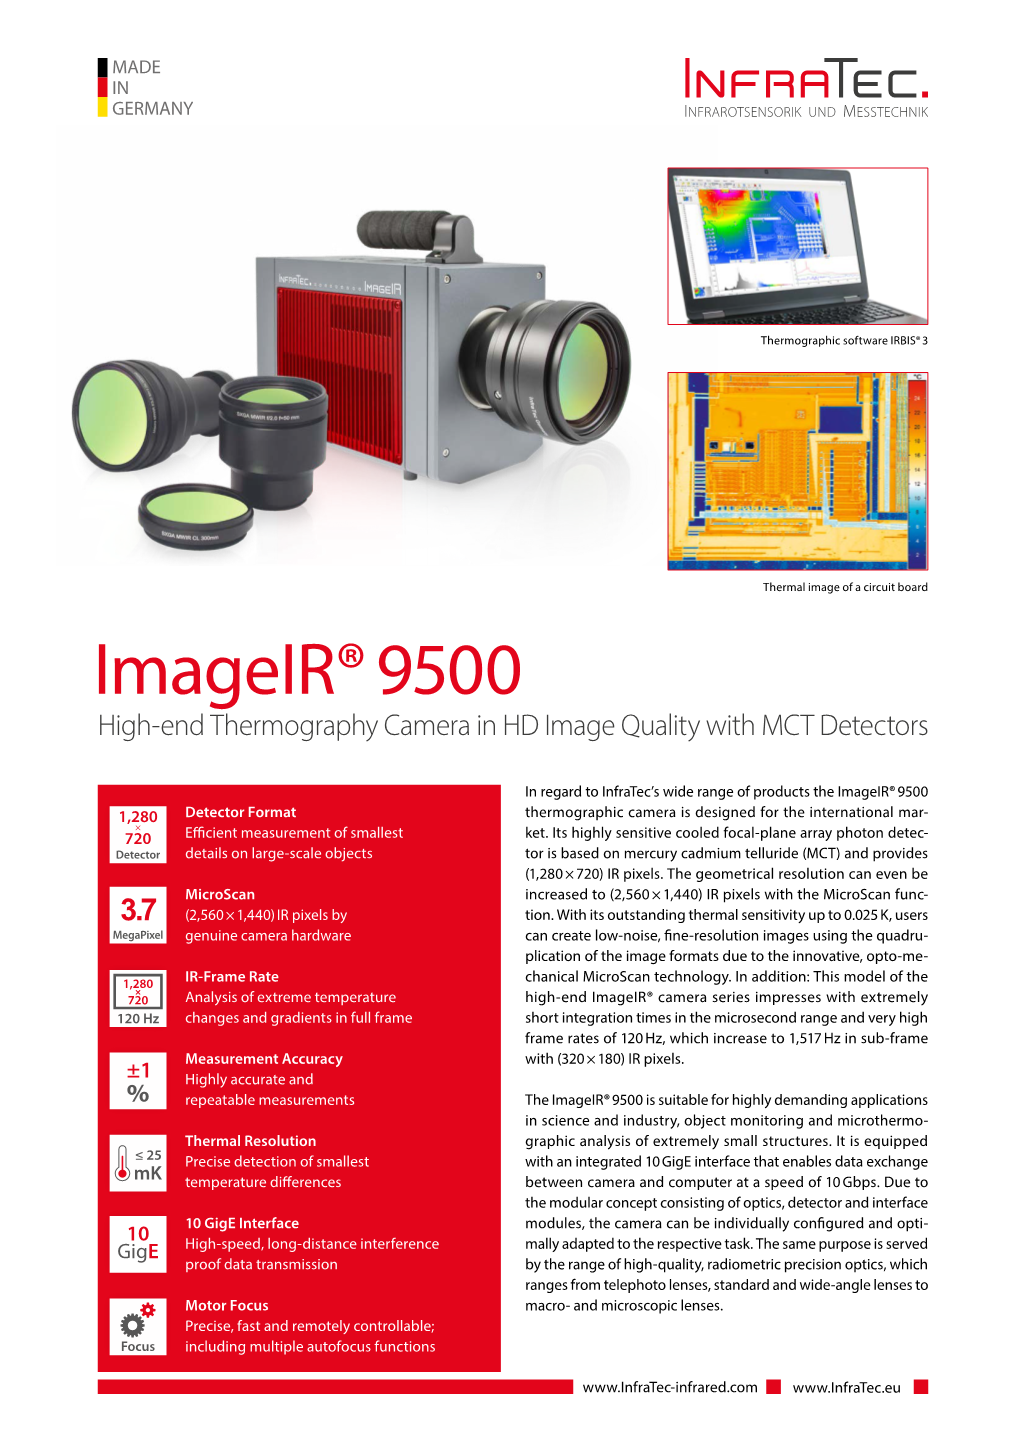 Imageir® 9500 High-End Thermography Camera in HD Image Quality with MCT Detectors